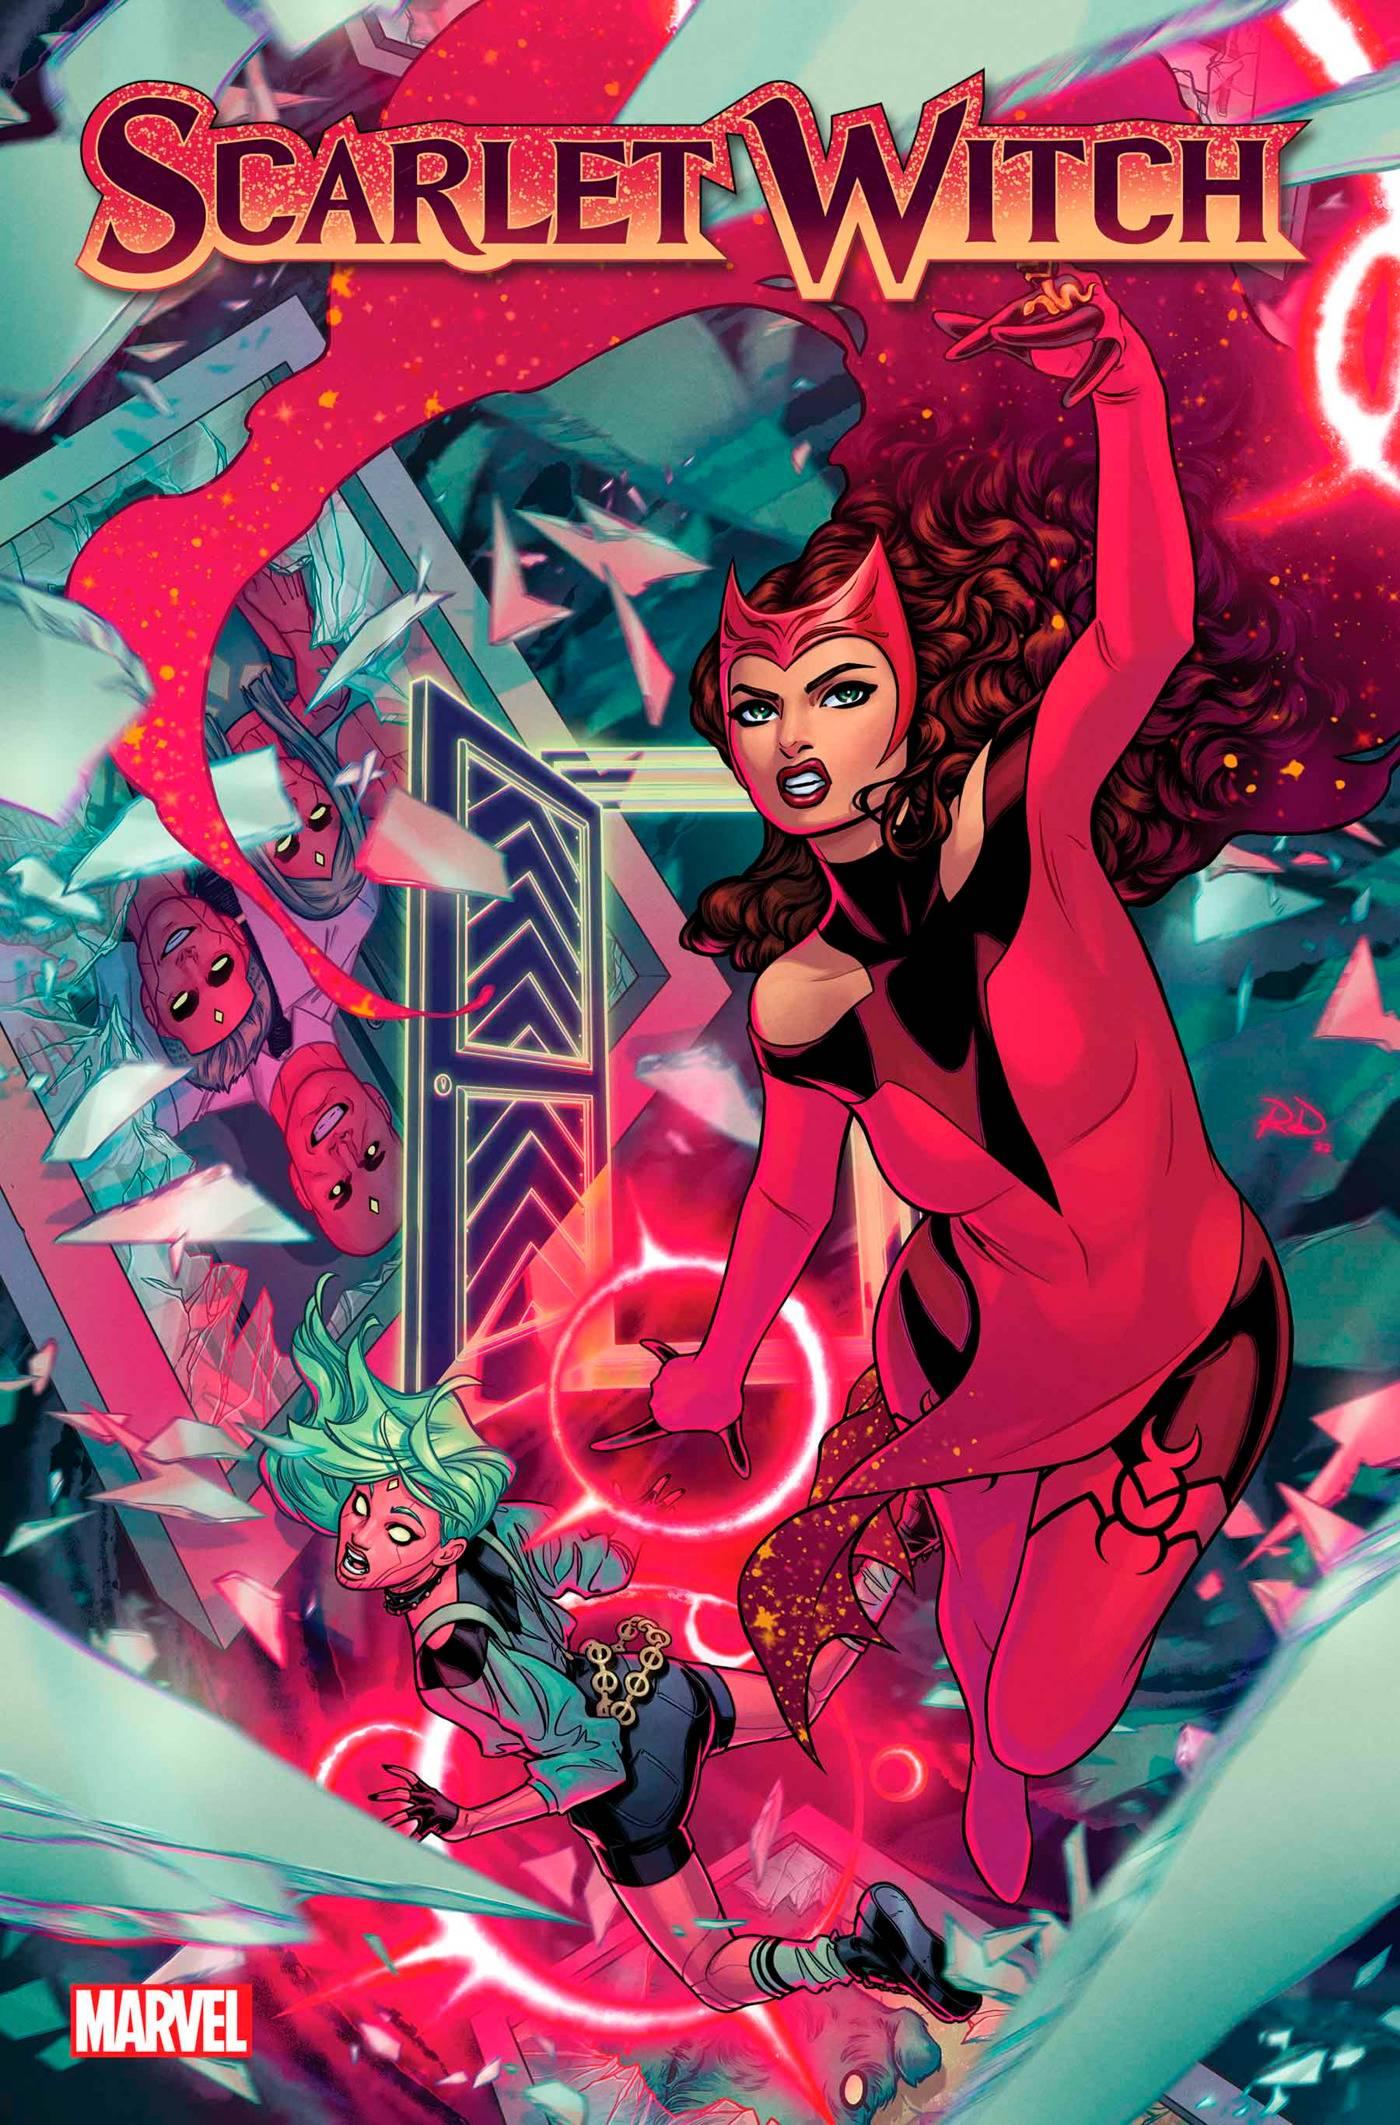 SCARLET WITCH #2 - HolyGrail Comix